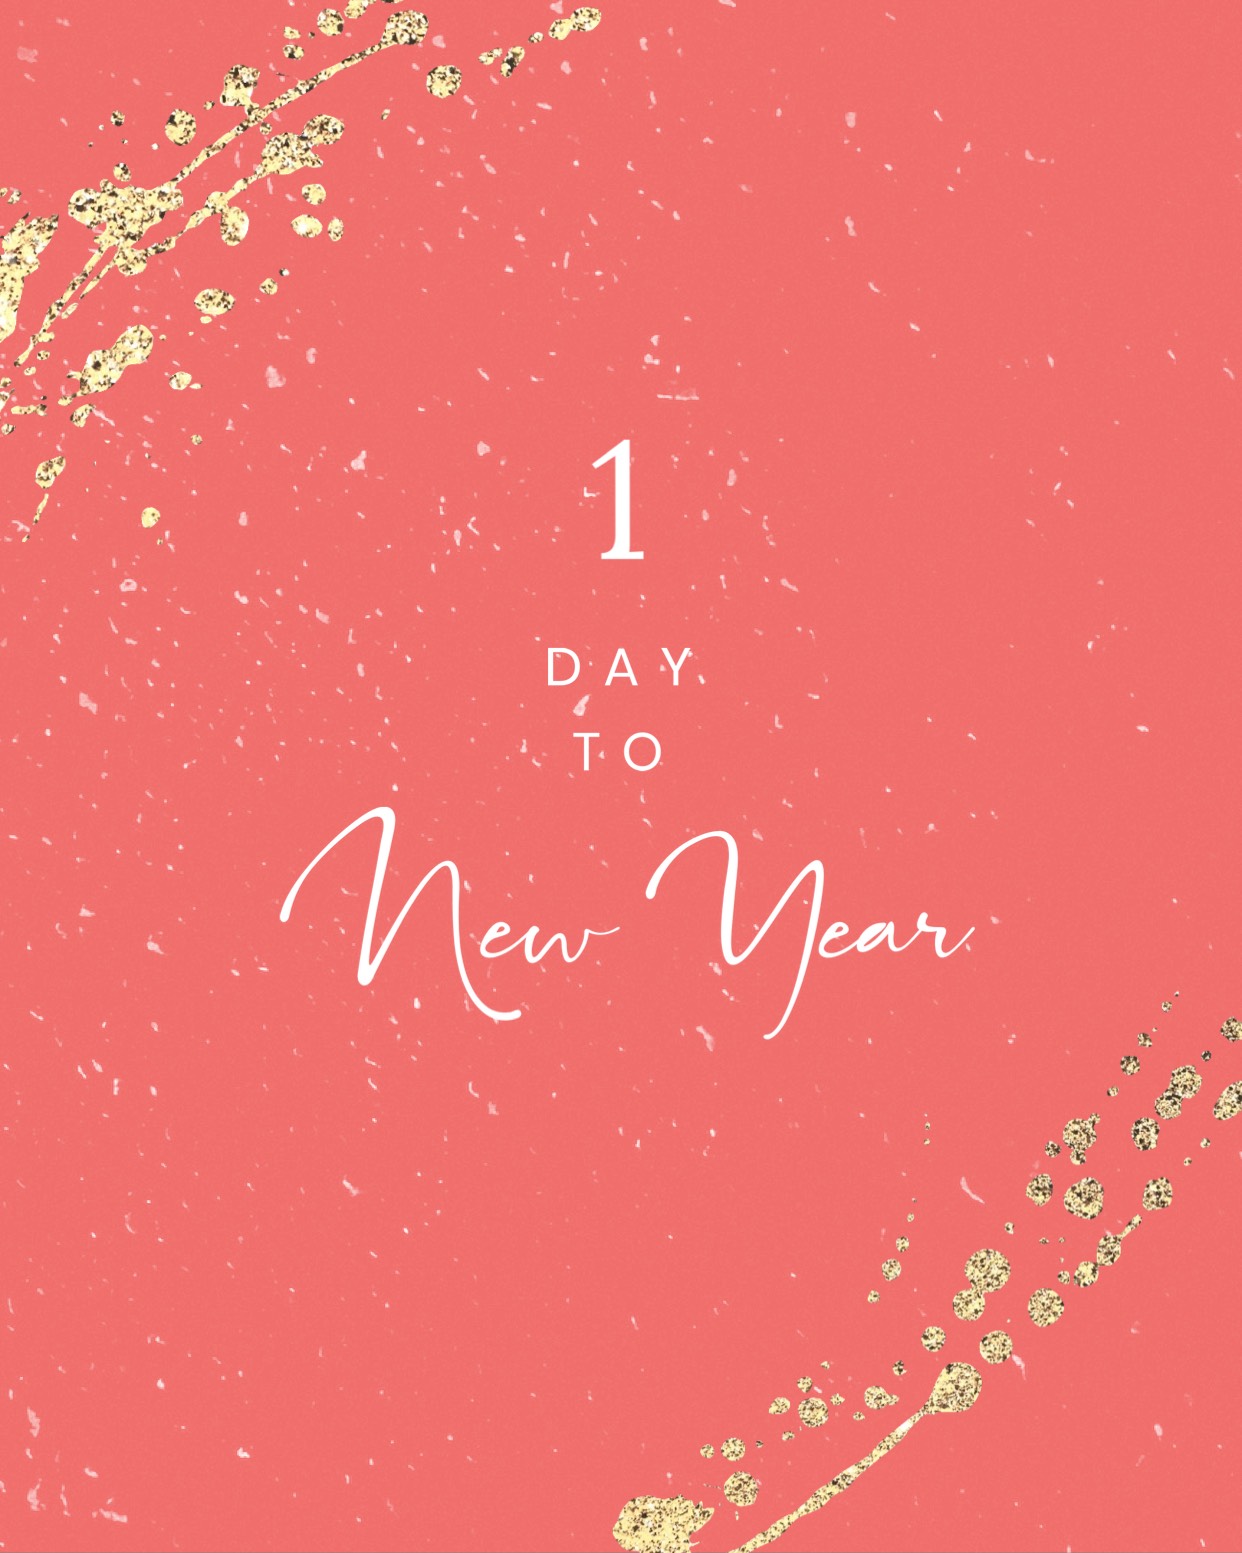 1 day to go for new year with gold glitters Happy New Year template